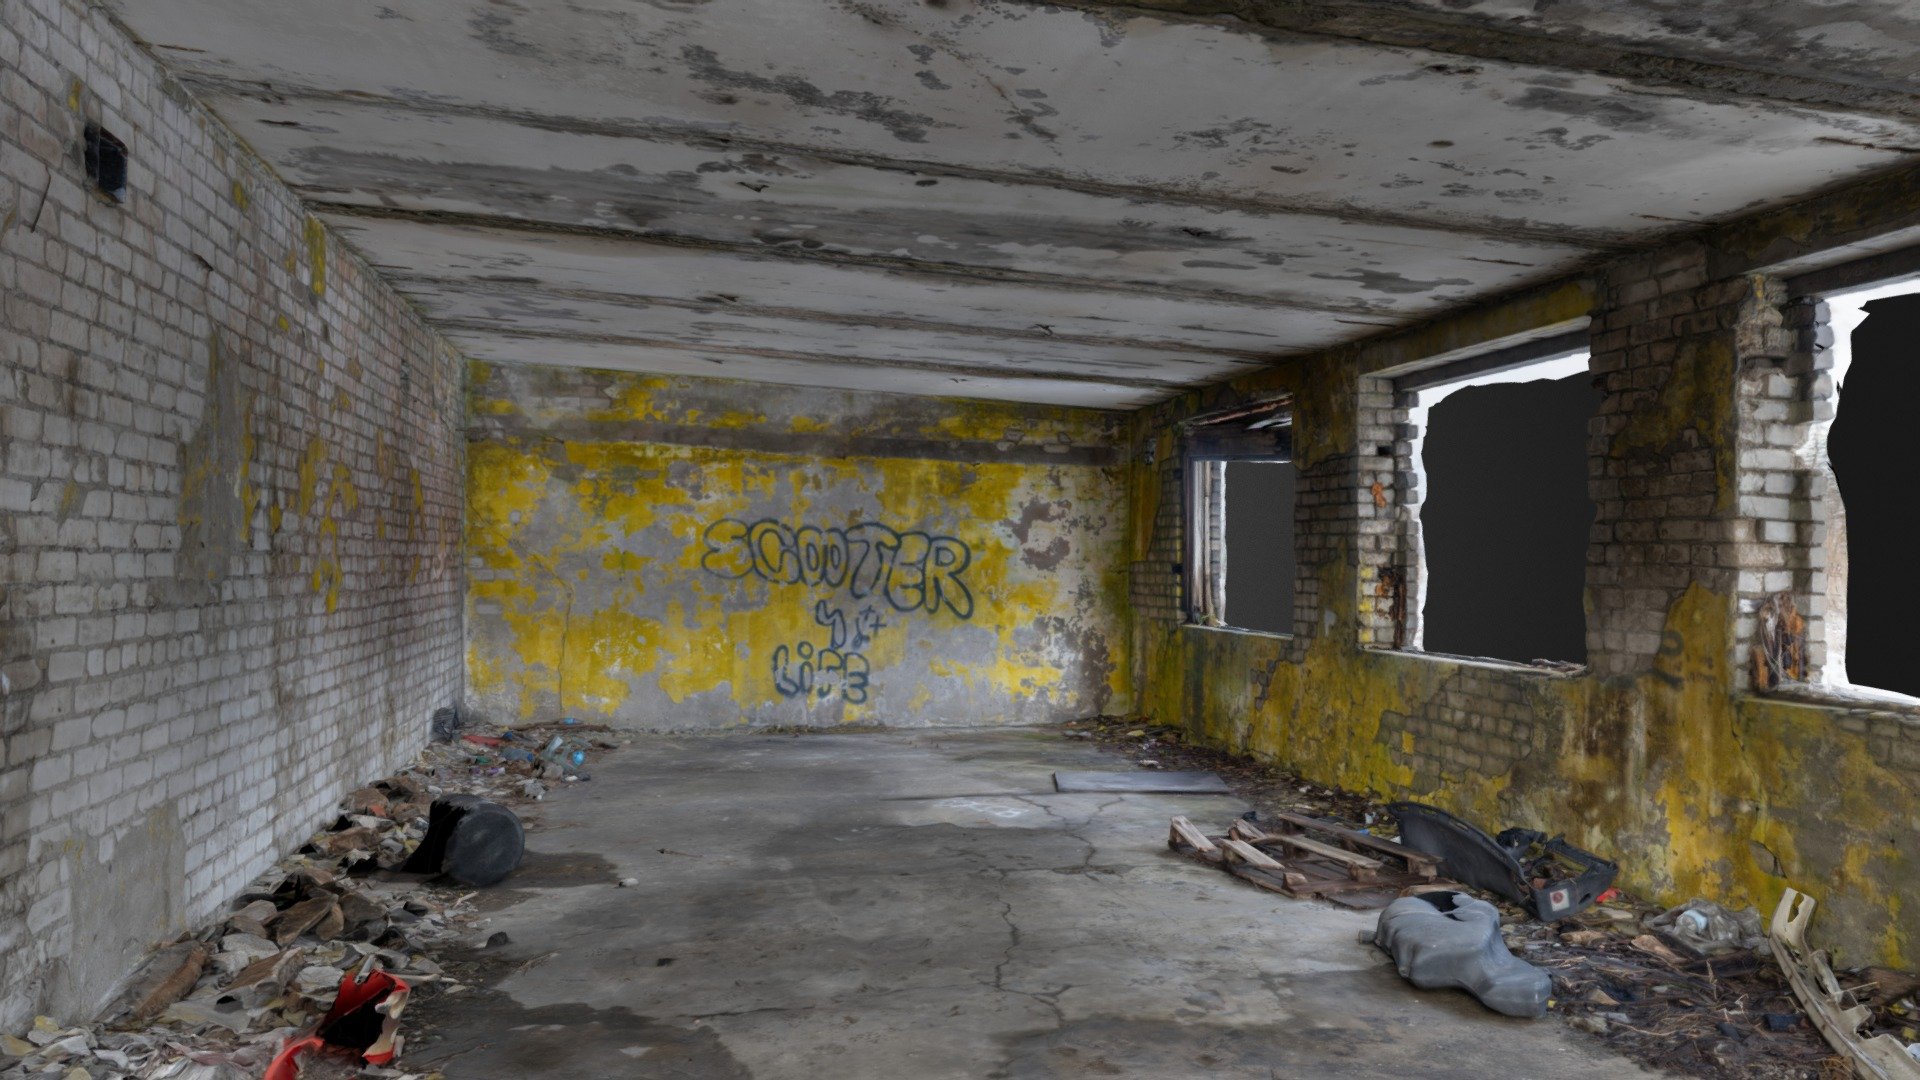 3D scan of an old, abandoned room which was probably some kind of a garage.

Peeling paint, old bricks, derelict walls and floor.

With normal map 3d model